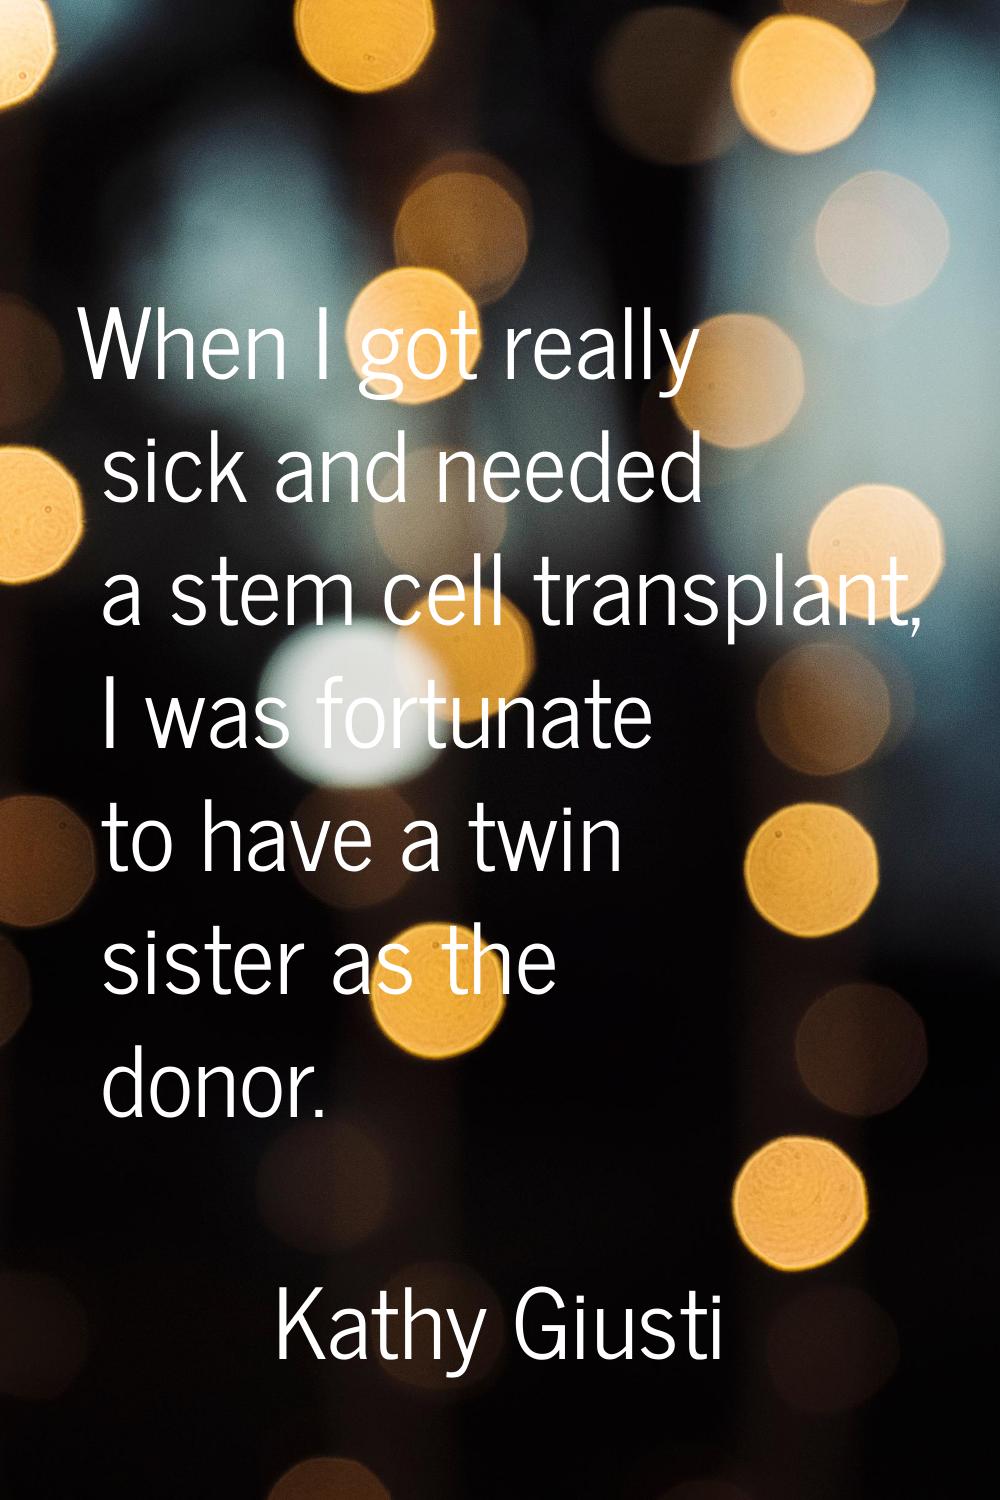 When I got really sick and needed a stem cell transplant, I was fortunate to have a twin sister as 